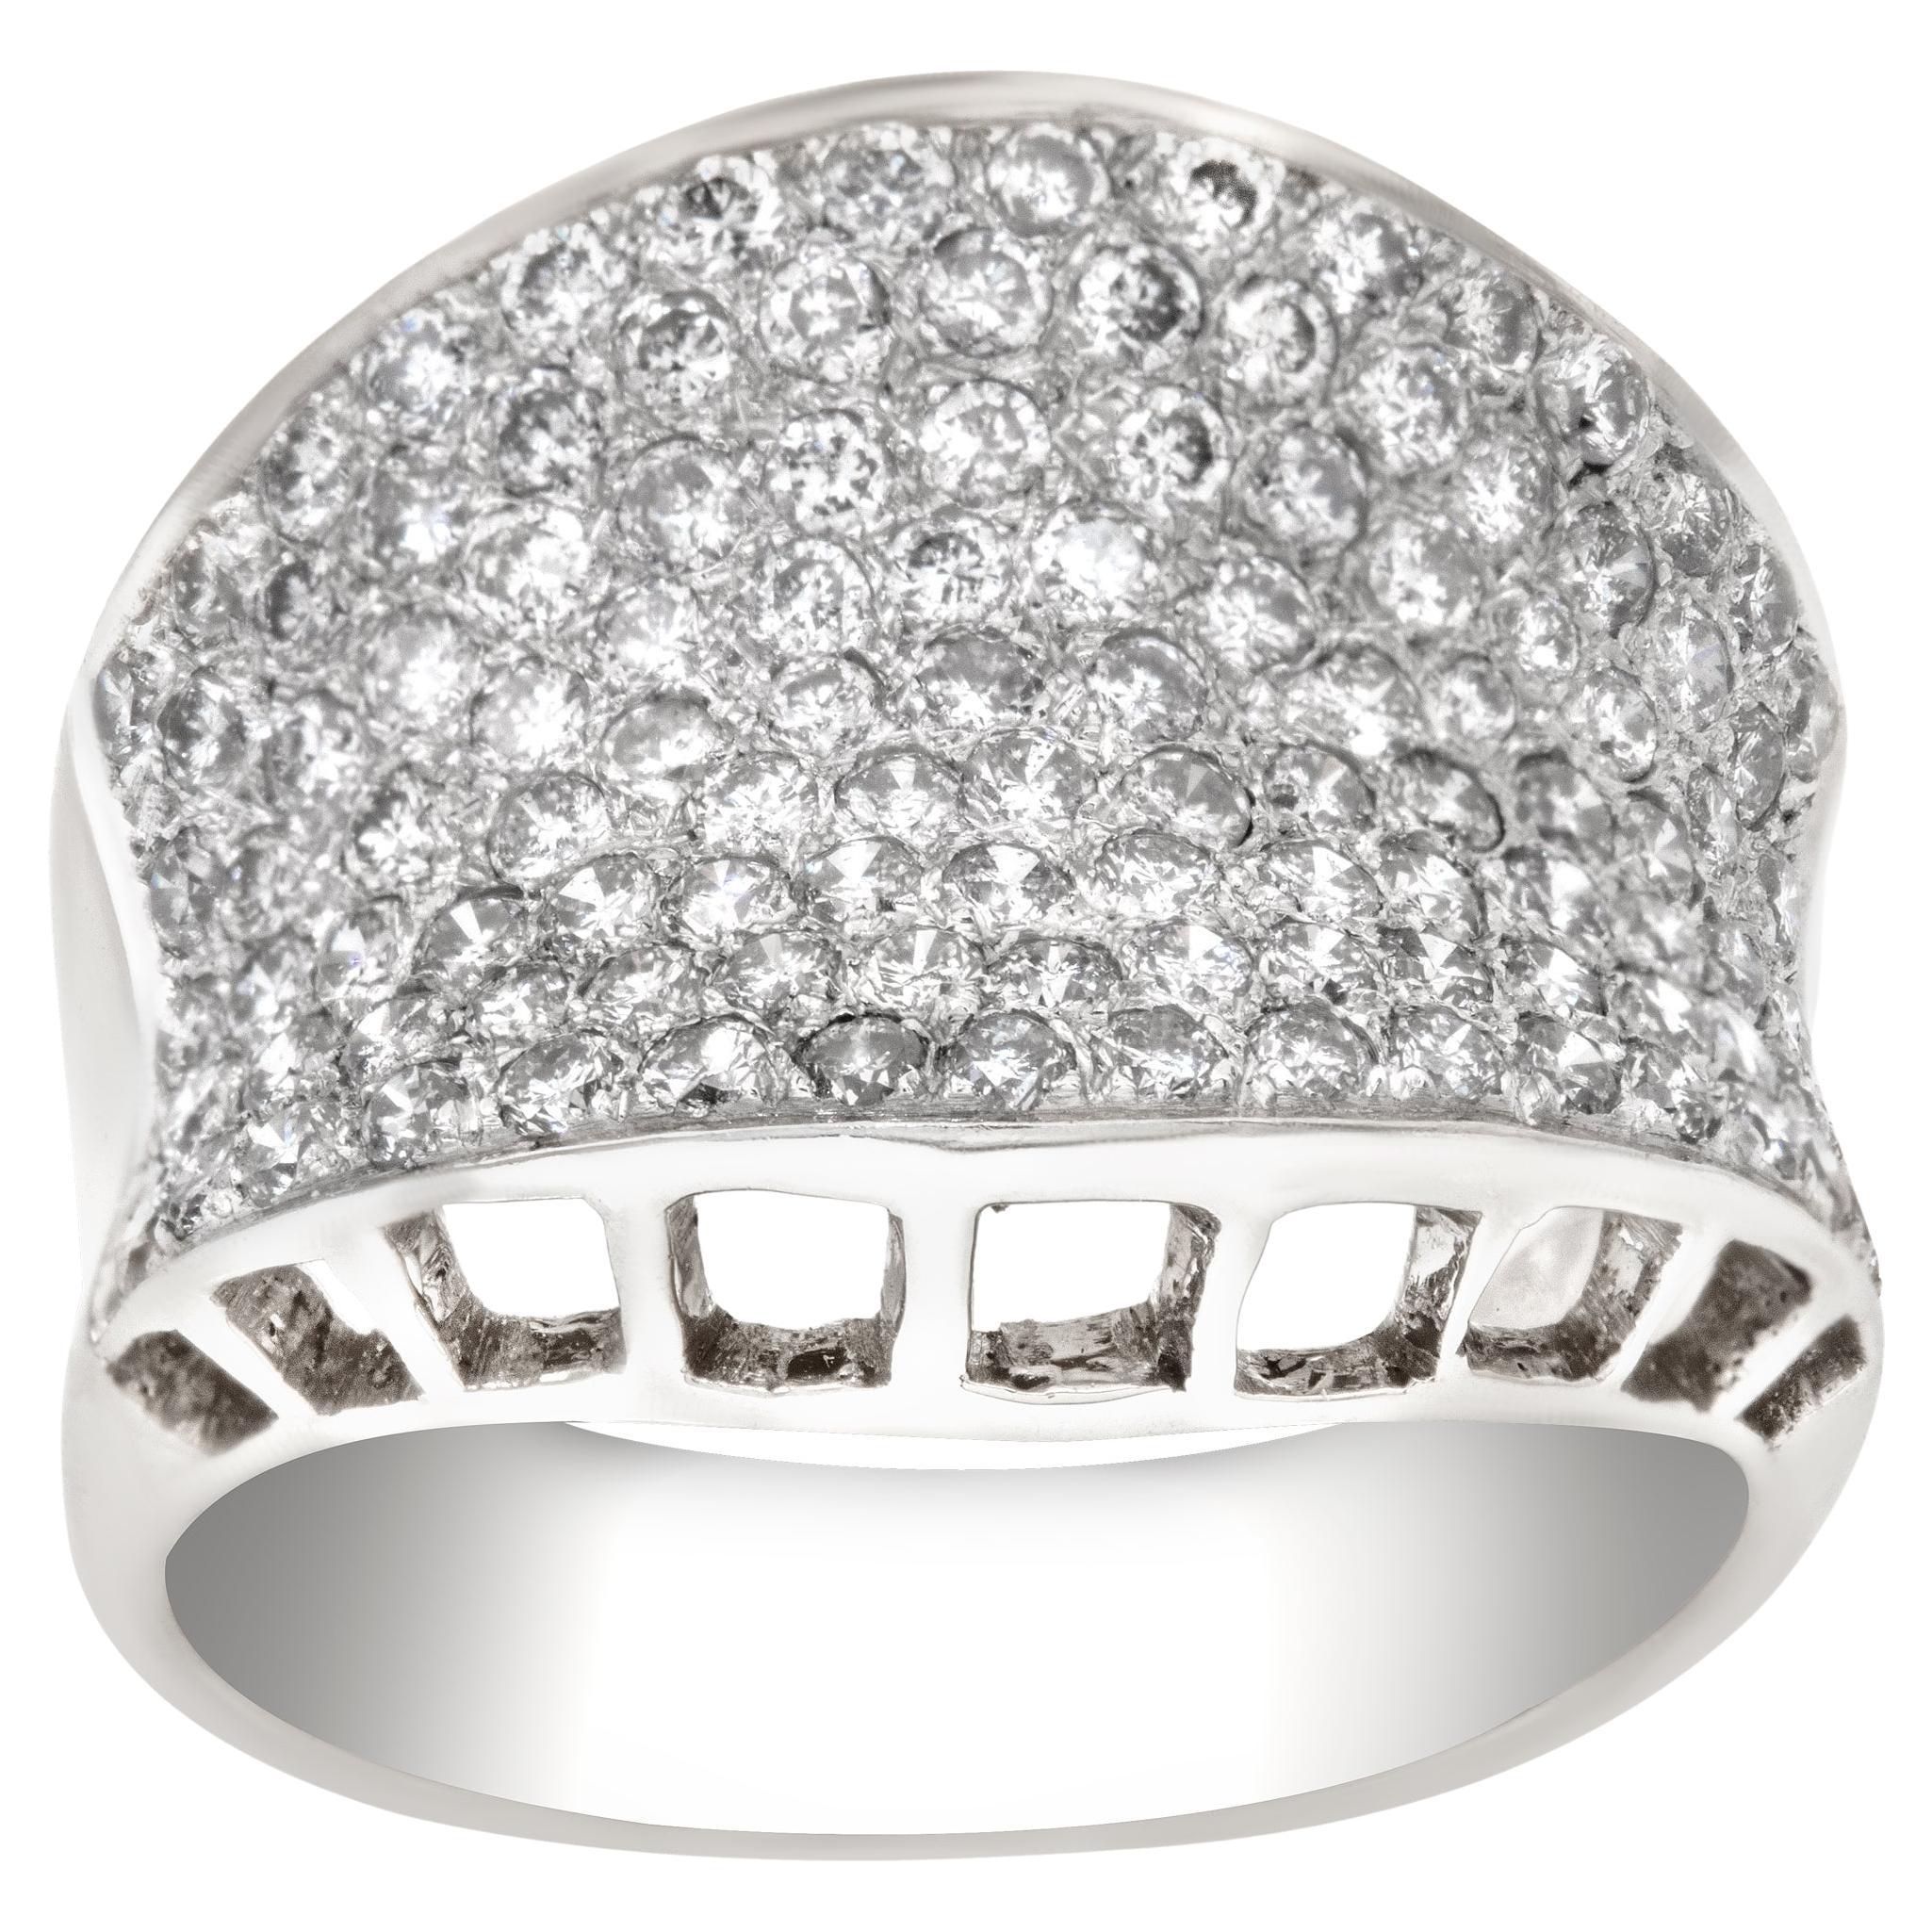 Exquisite Pave Diamond Ring in 18k White Gold. 1.25 Carats in Pave Diamonds For Sale